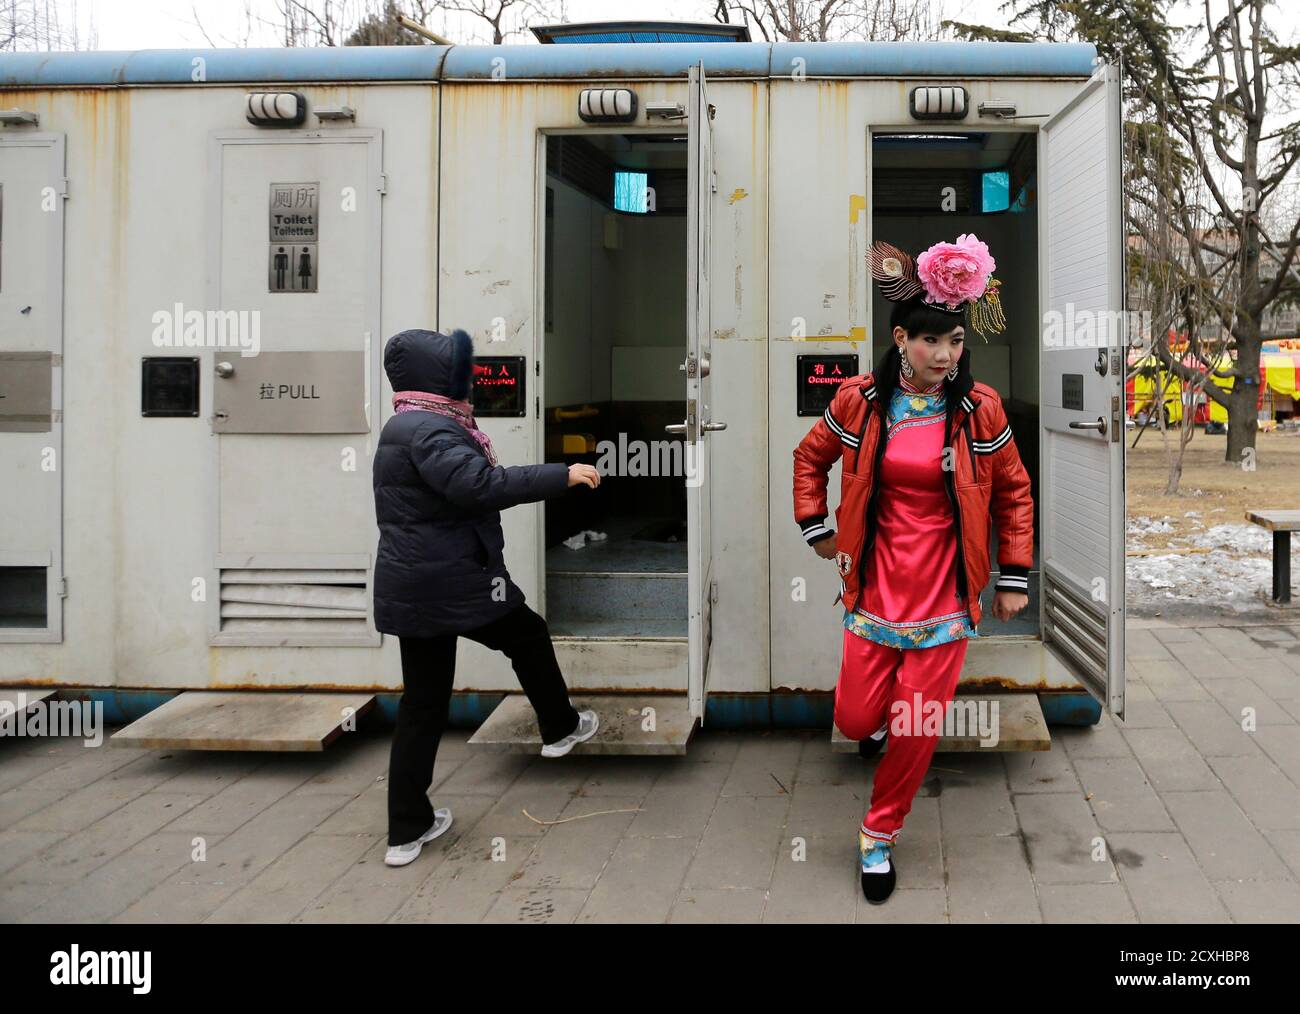 A male folk artist (R) dressed as a traditional Chinese woman walks out of a mobile toilet ahead of a performance at a Spring Festival Temple Fair on the fifth day of the Chinese Lunar New Year at Longtan Park in Beijing February 14, 2013. The Lunar New Year, or Spring Festival, began on February 10 and marks the start of the Year of the Snake, according to the Chinese zodiac. REUTERS/Jason Lee (CHINA - Tags: SOCIETY ANNIVERSARY) Stock Photo